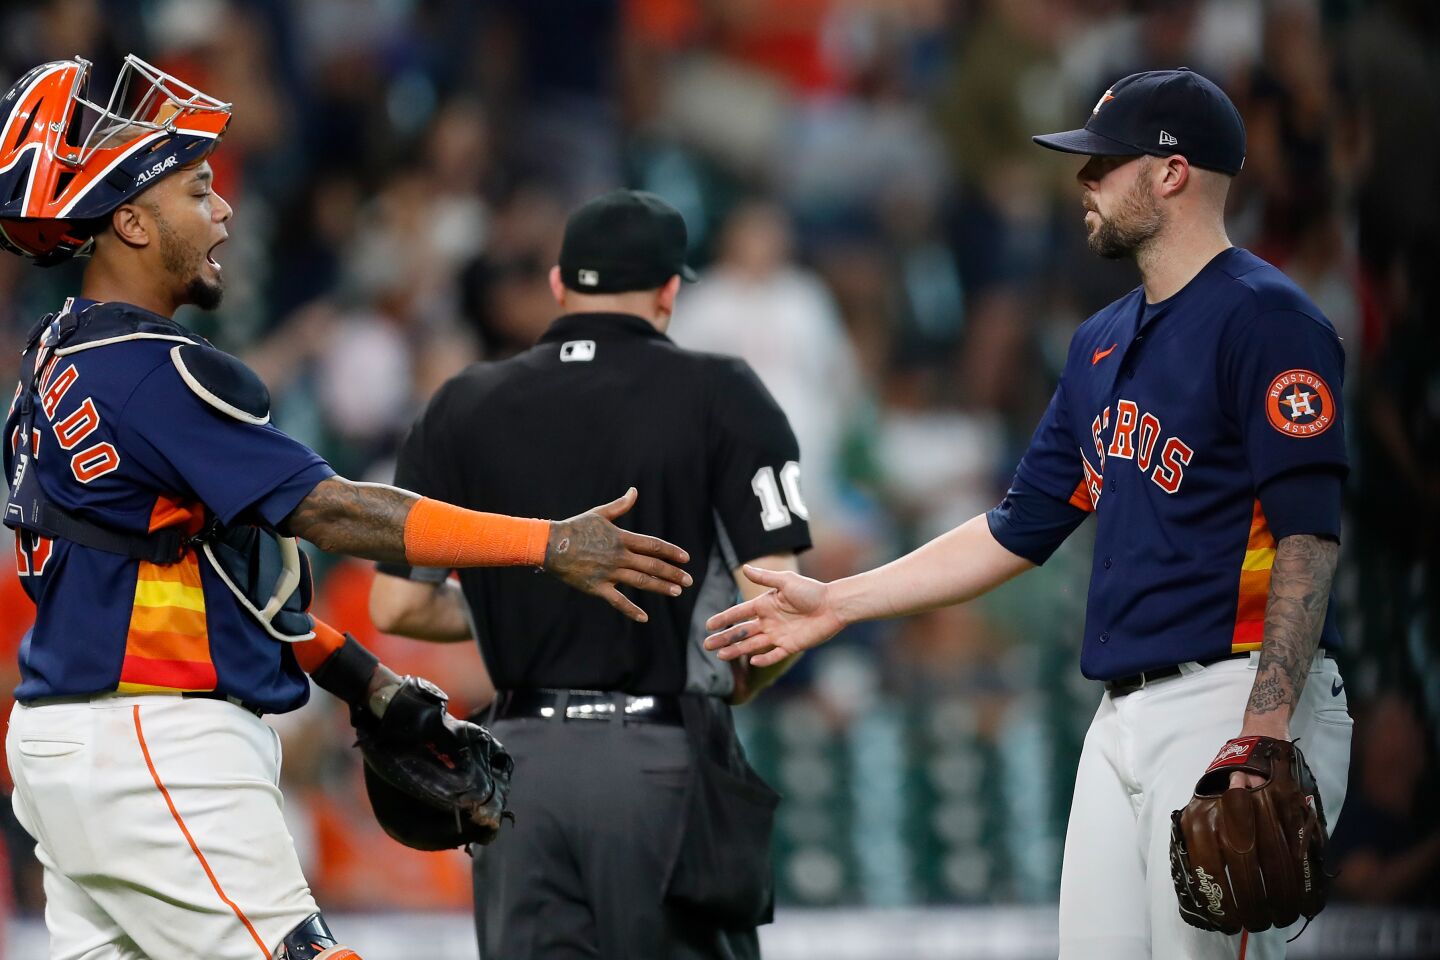 5 | Houston Astros (83-59; LW: 5)How the West will be won: Thus far, the Astros are 10-5 against the Angels, 11-8 against the Mariners, 11-4 against the Rangers and 9-4 against the Athletics.